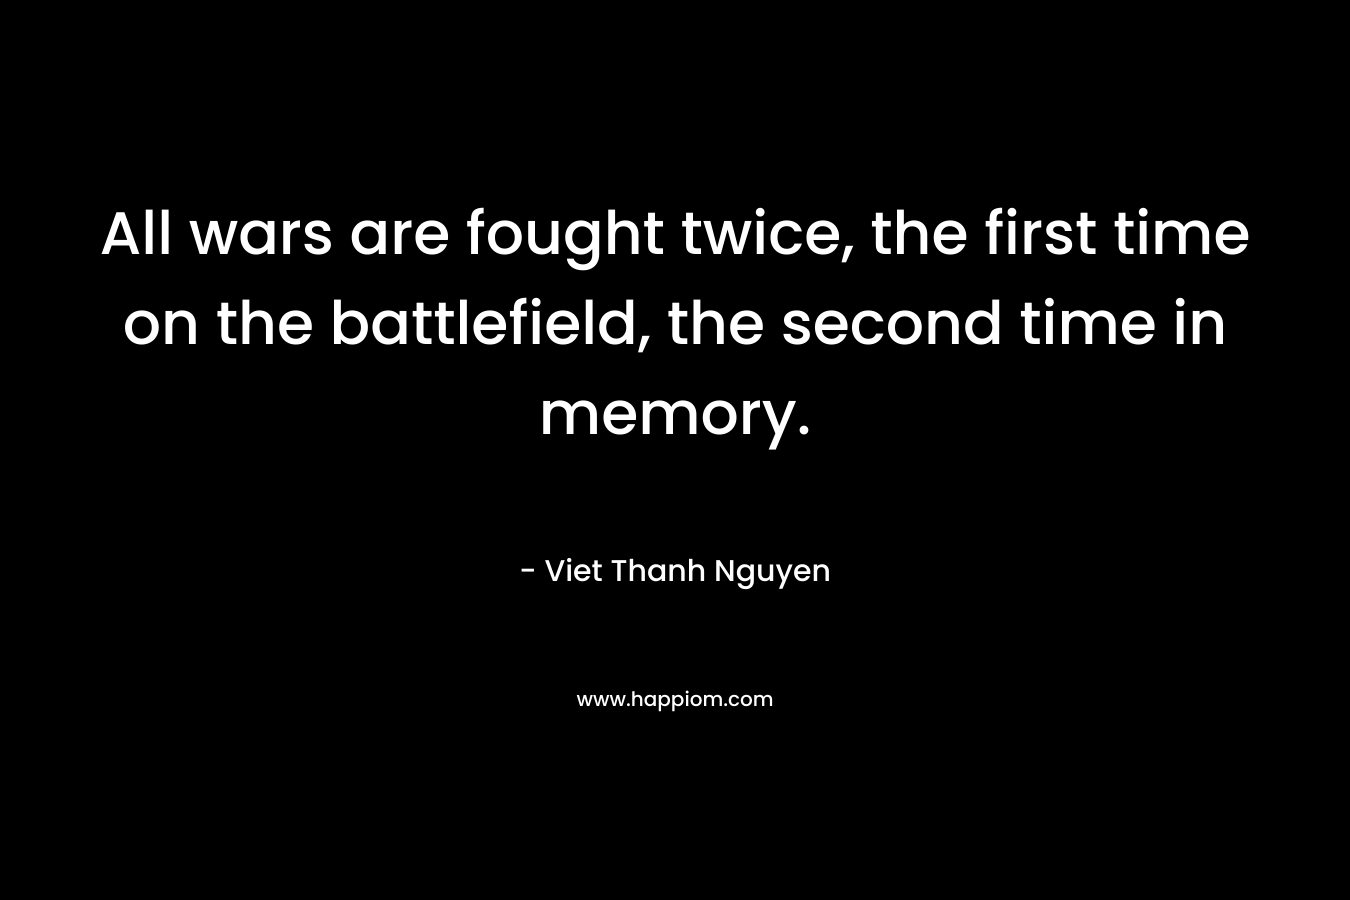 All wars are fought twice, the first time on the battlefield, the second time in memory.